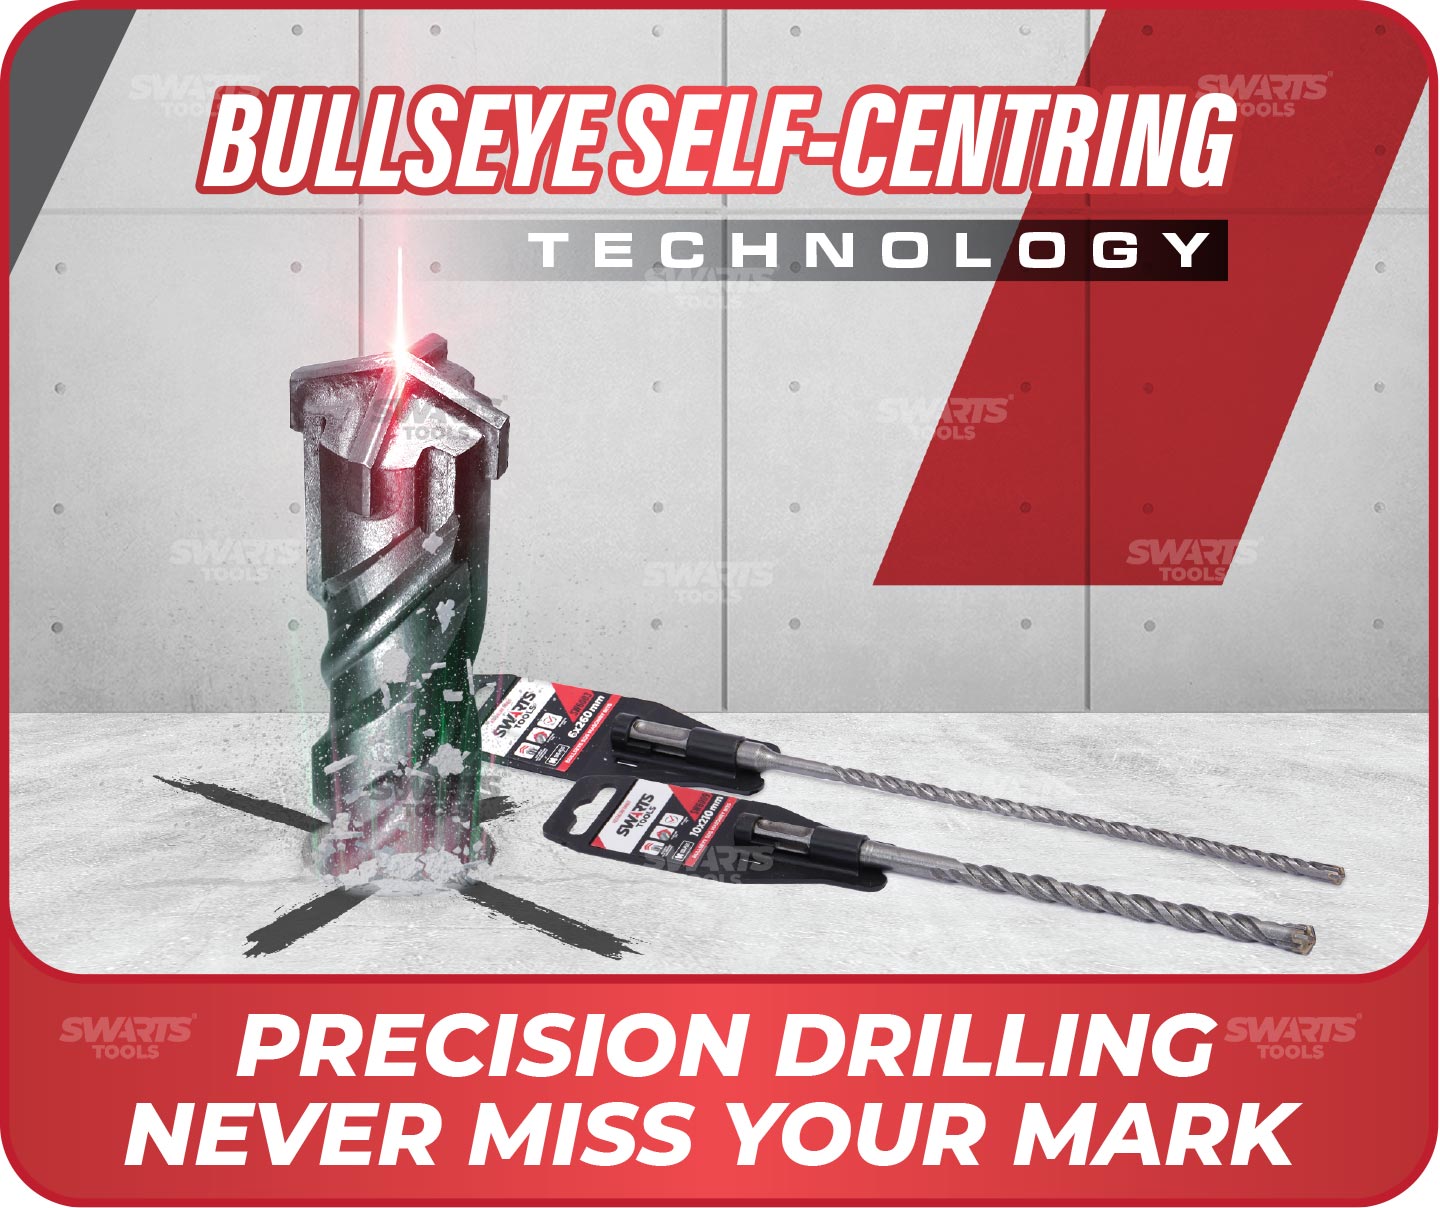 PRECISION DRILLING with BULLSEYE SELF-CENTRING TECH